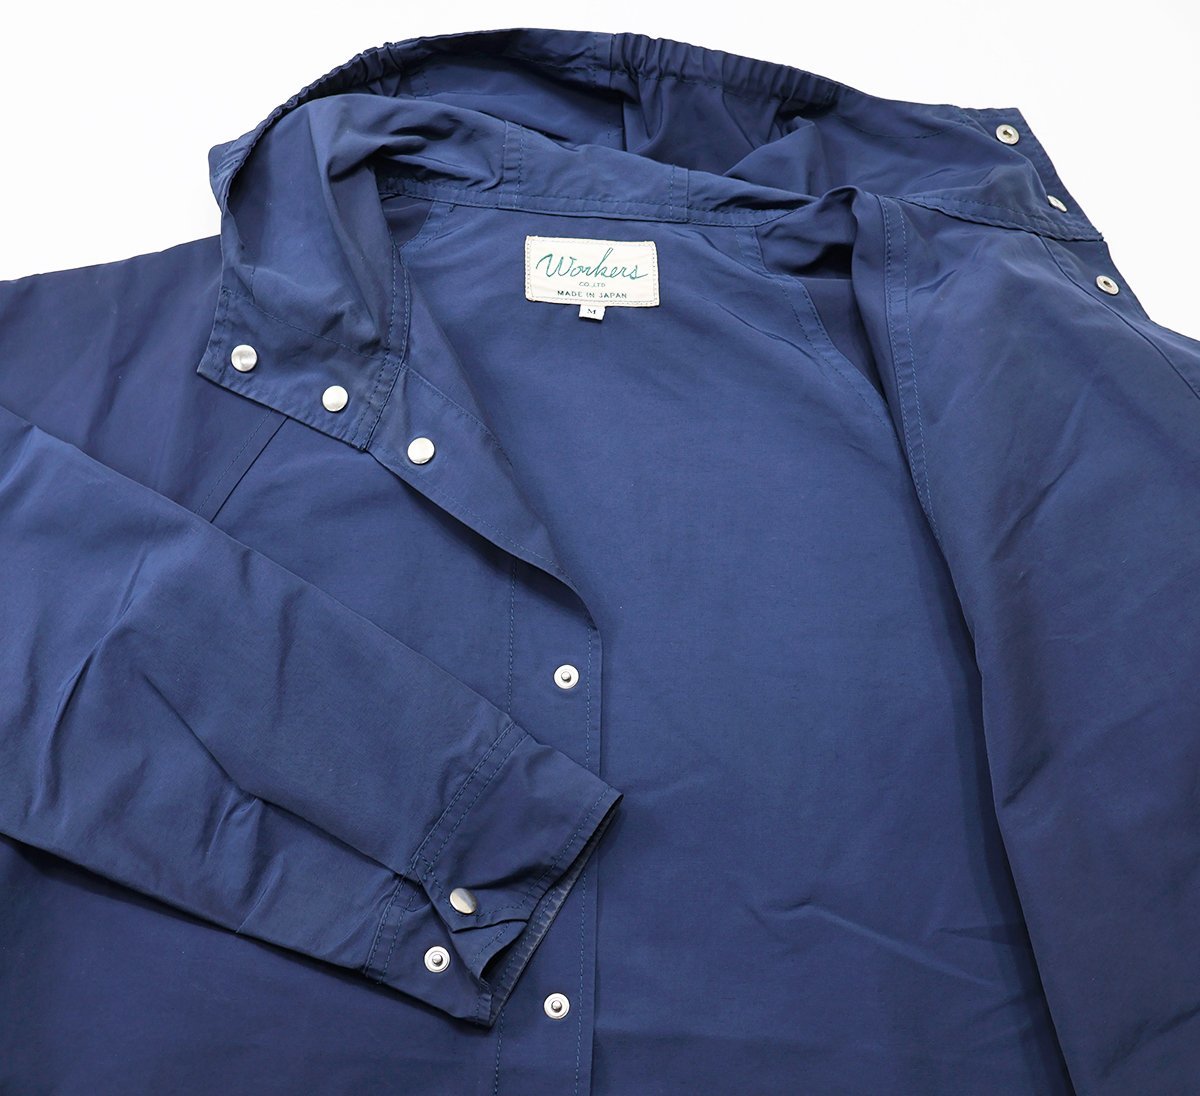 Workers K&T H MFG Co (ワーカーズ) Mountain Shirt Parka / マウンテンシャツパーカー 60/40クロス ネイビー size M / ロクヨン_画像4